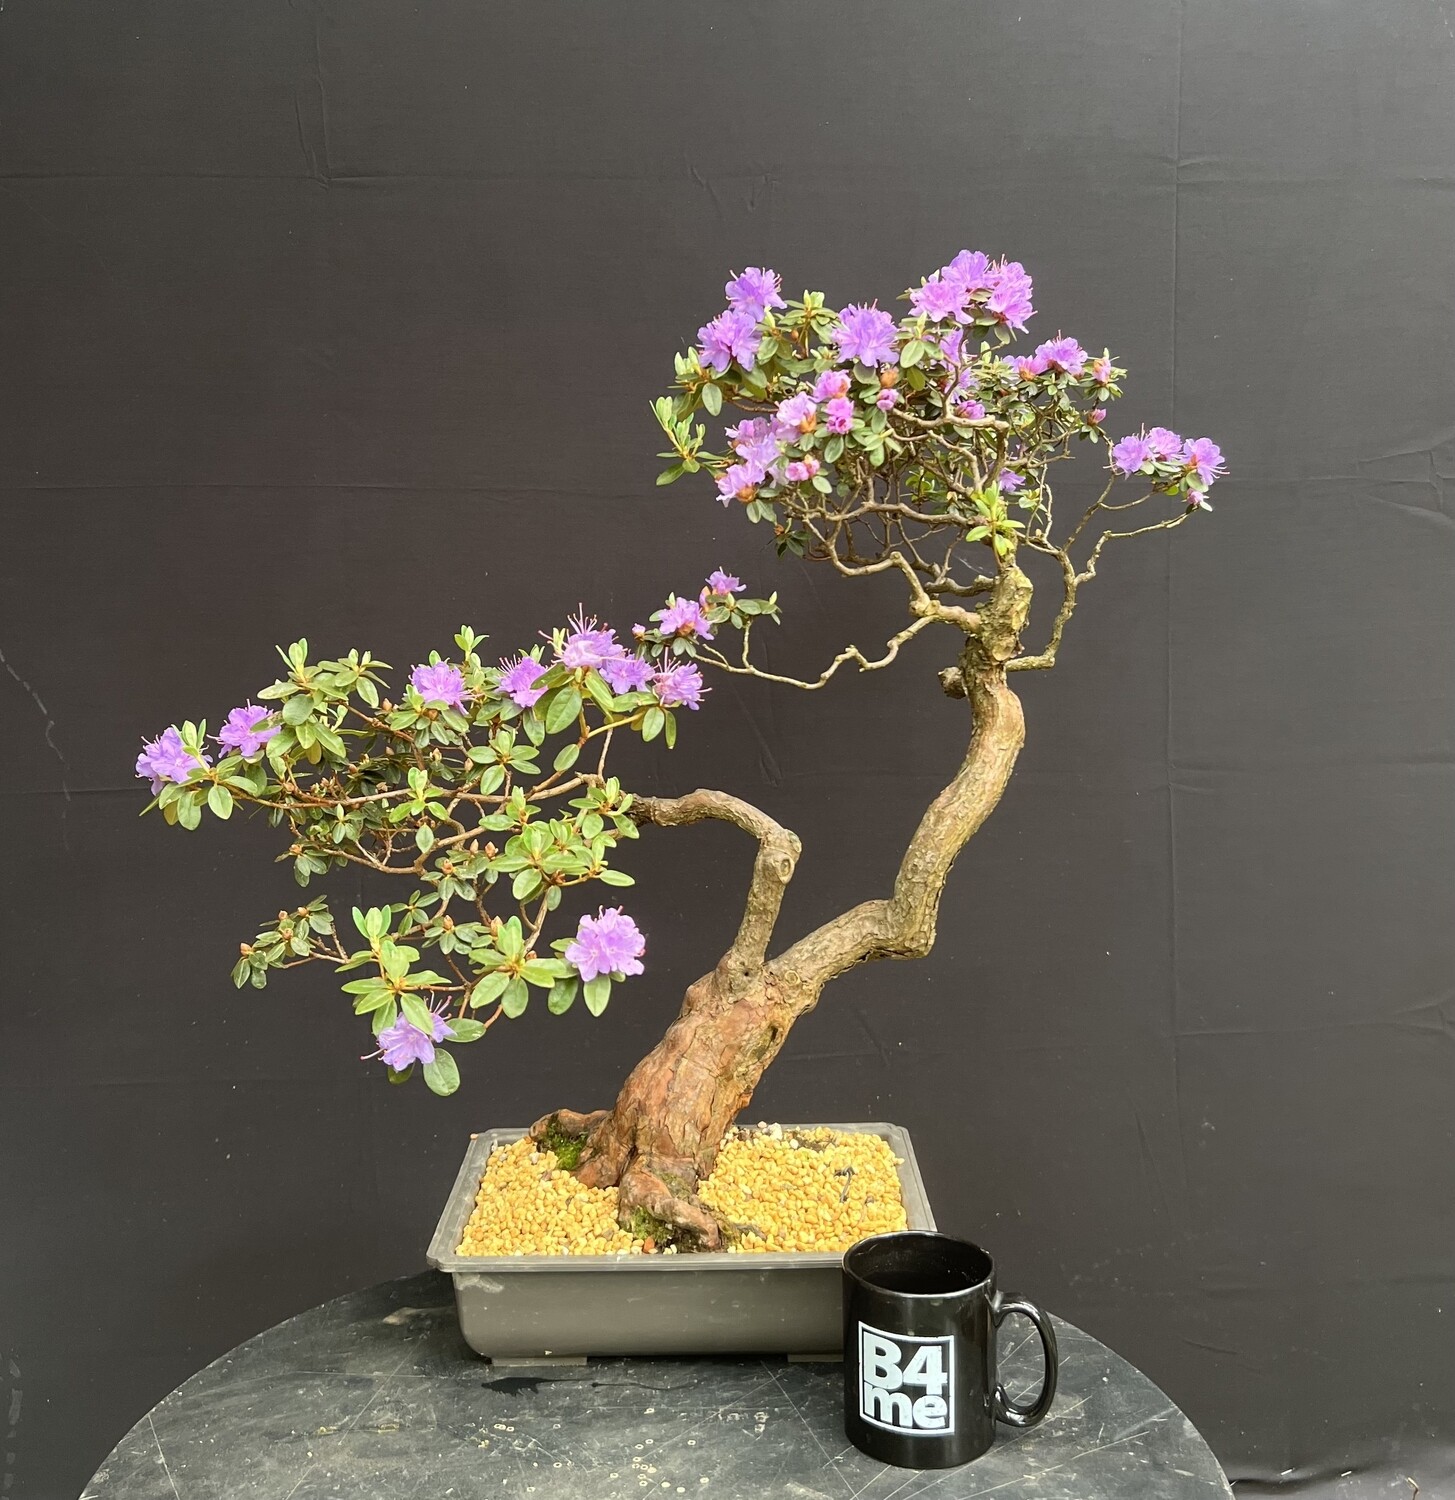 SOLD Rhododendron indicum /Small-Leaved Rhododendron bonsai